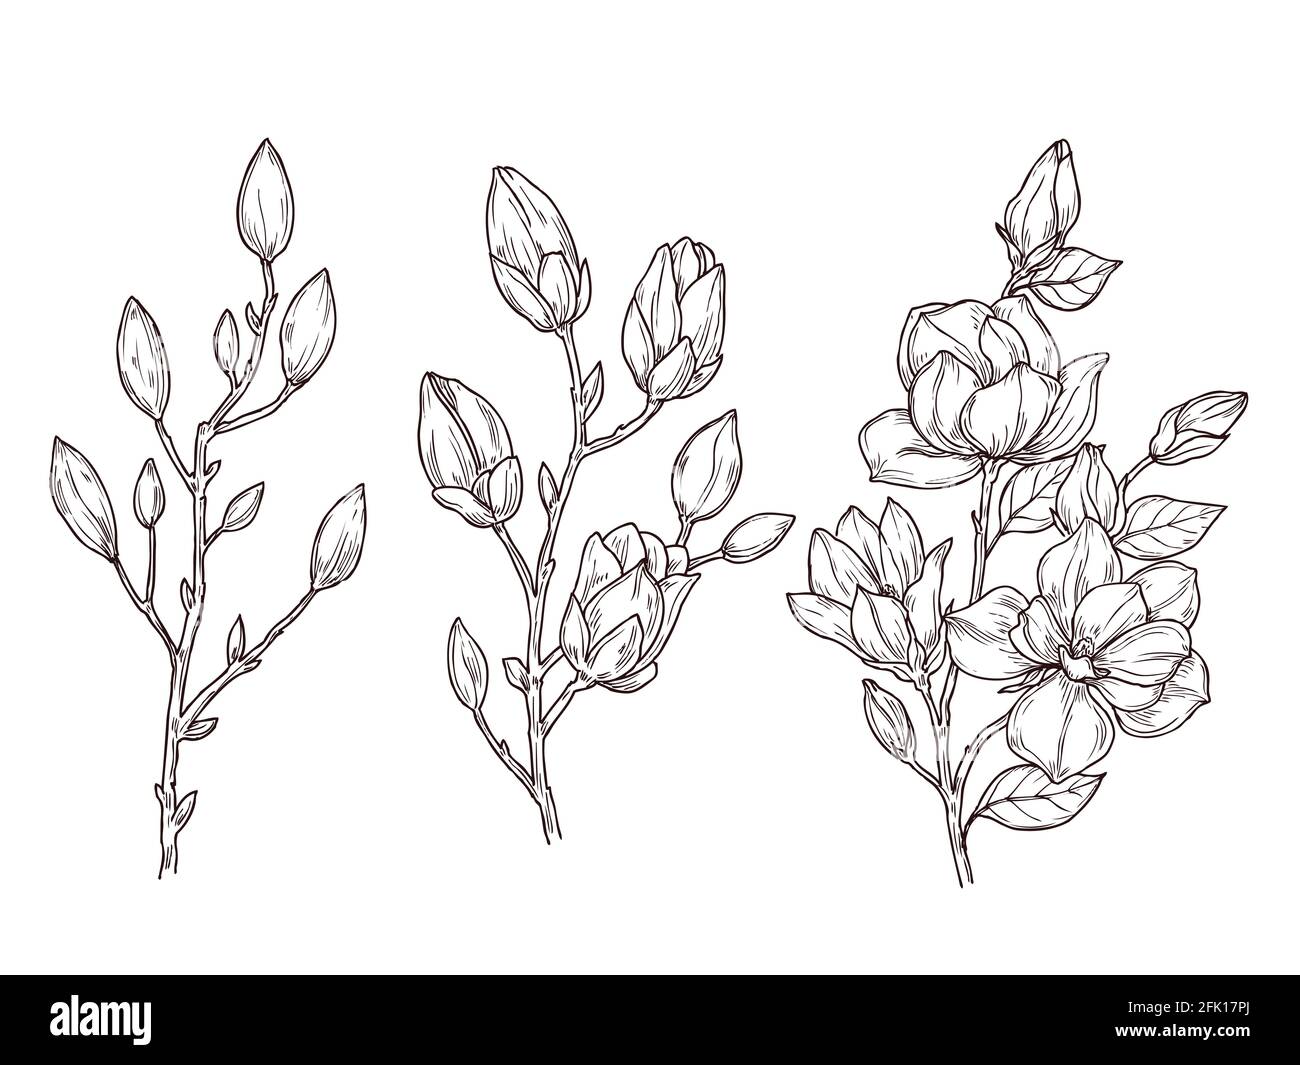 Magnolia sketch. Art floral blossom branch and flowers bunch. Drawing ...